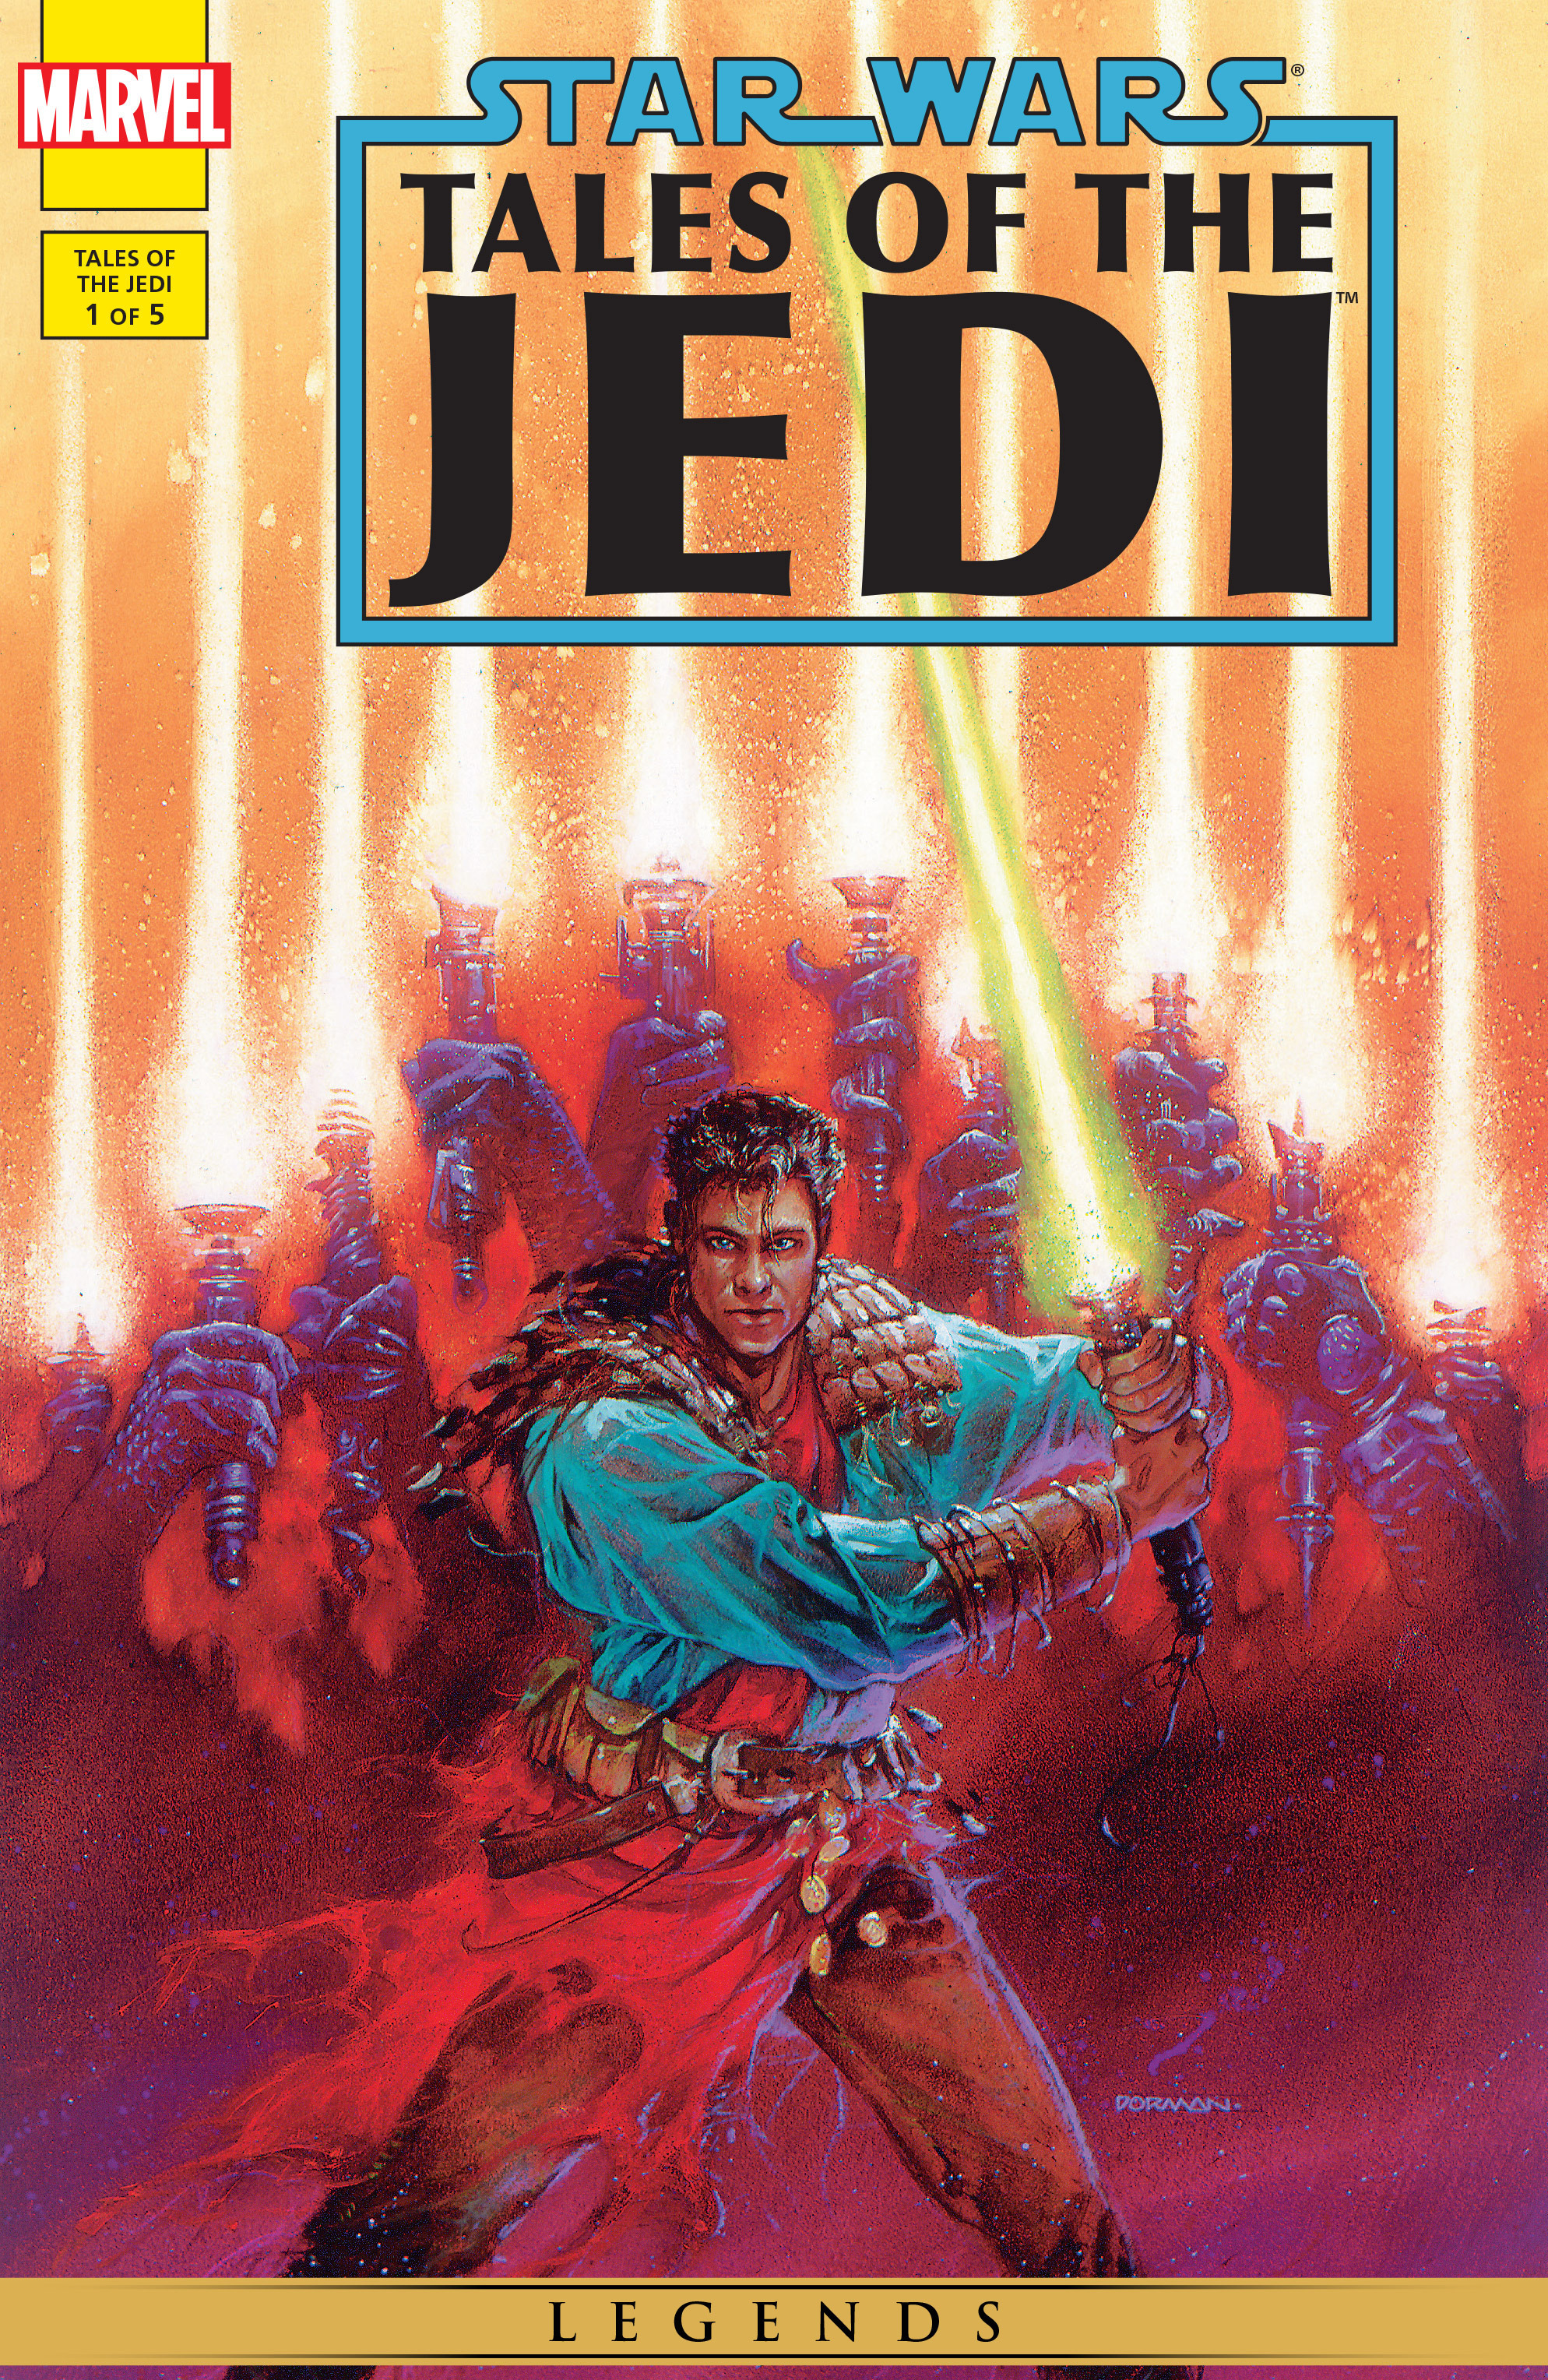 Read online Star Wars: Tales of the Jedi - Knights of The Old Republic comic -  Issue #1 - 1